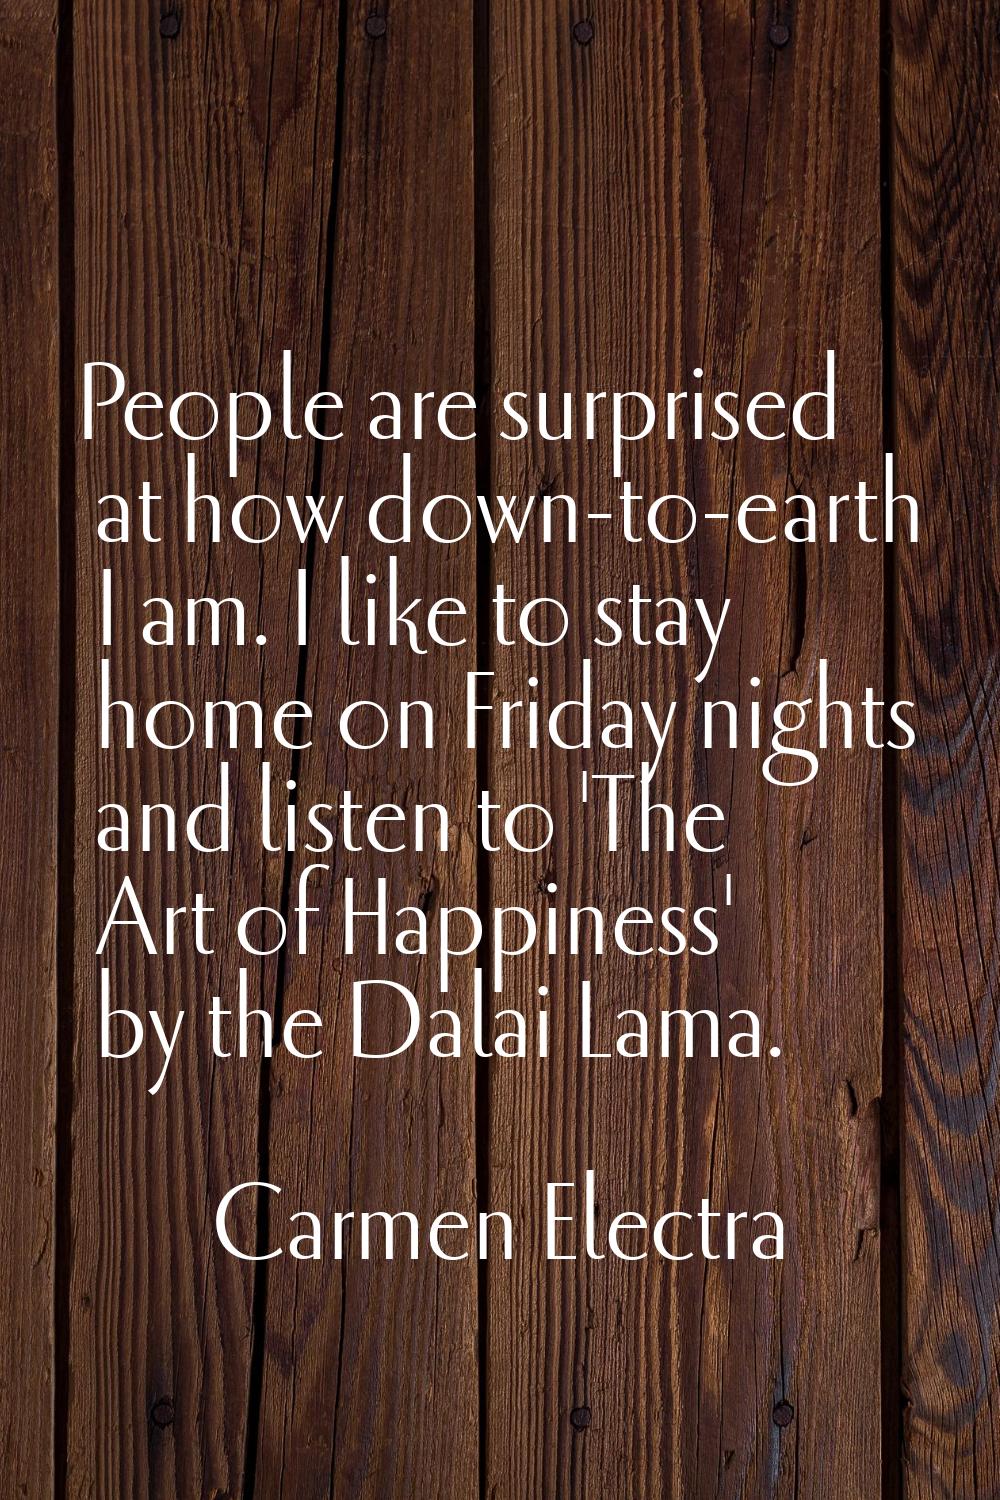 People are surprised at how down-to-earth I am. I like to stay home on Friday nights and listen to 